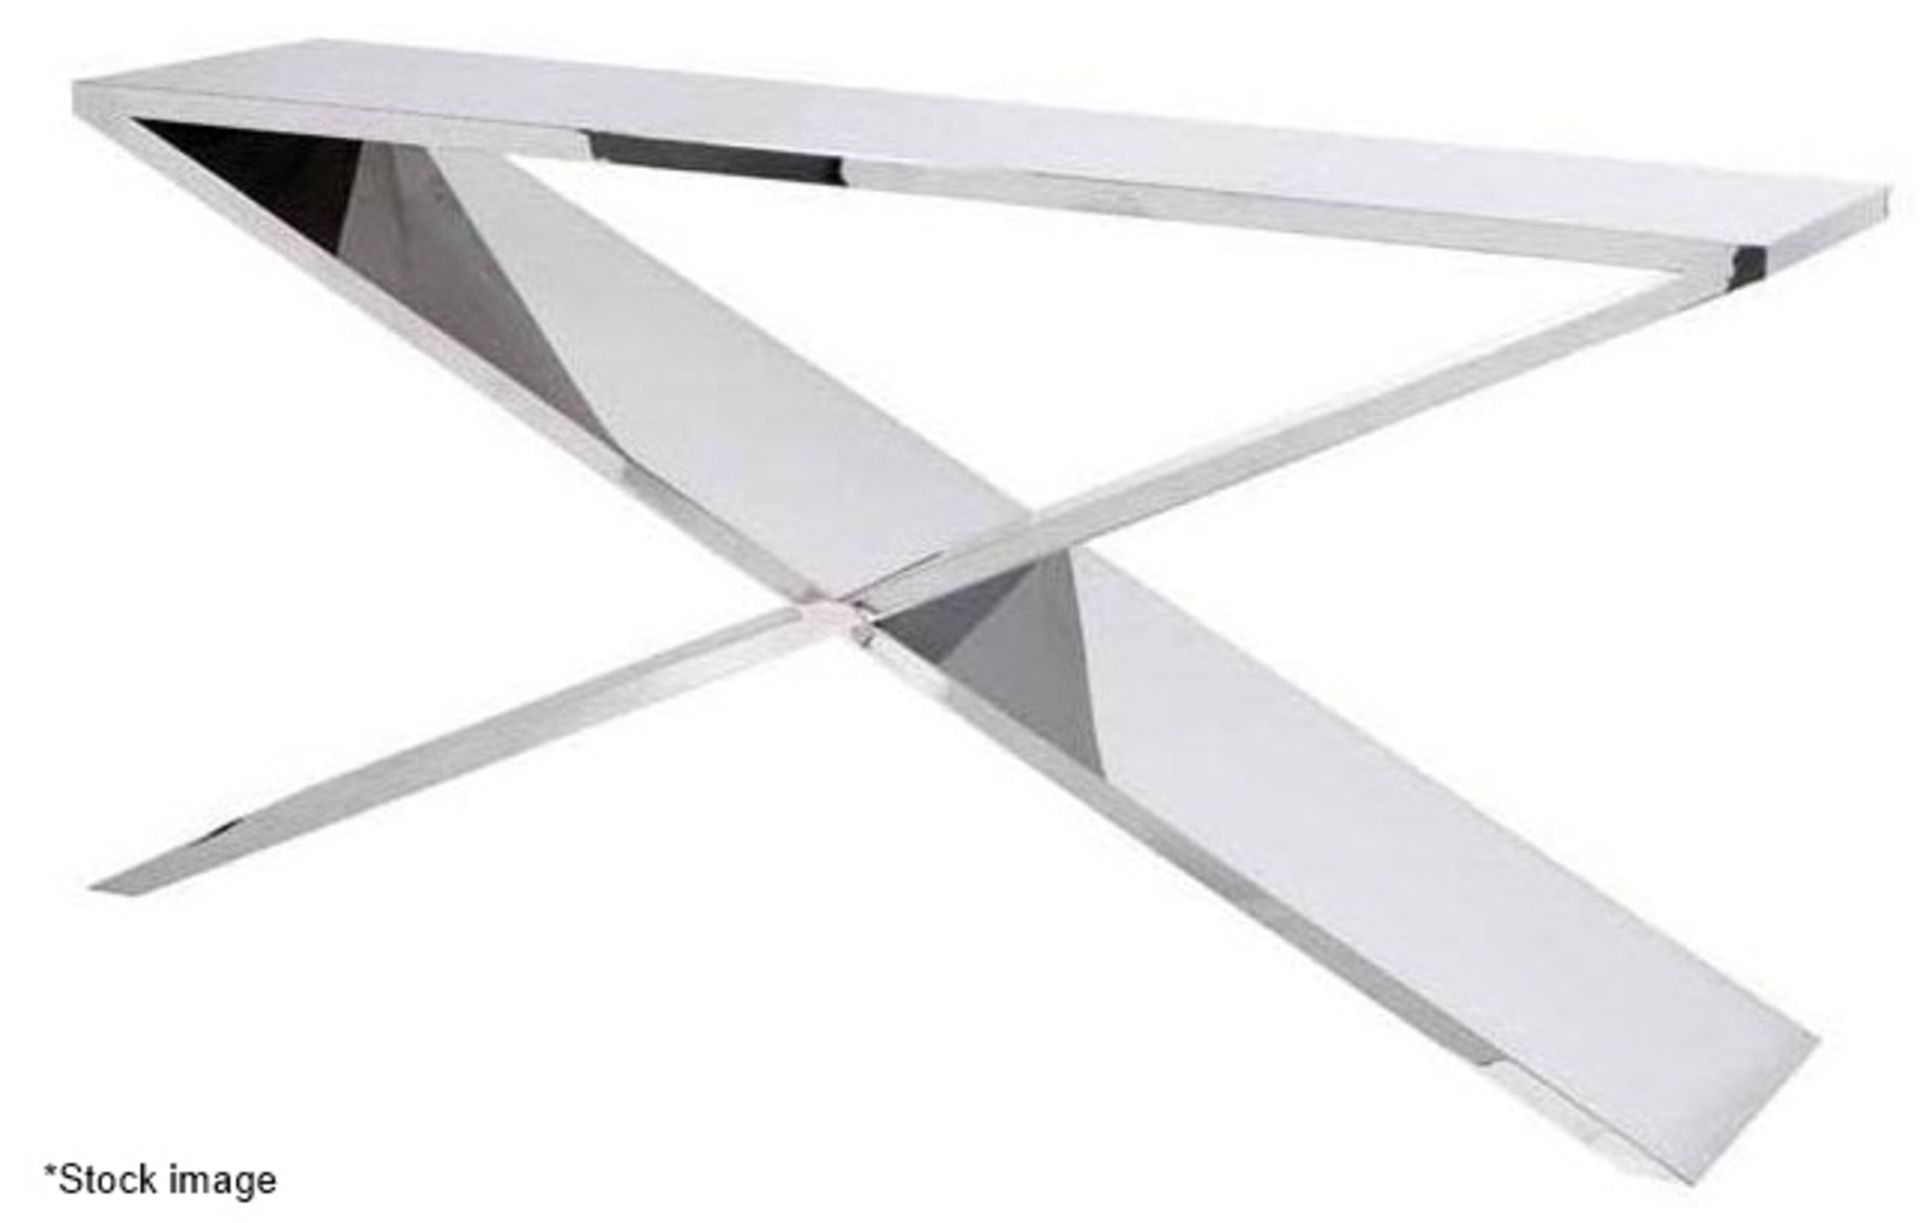 1 x EICHHOLTZ 'Metropole' Luxury Handcrafted Mirrored Console Table - Original Price £2,810 - Image 8 of 10